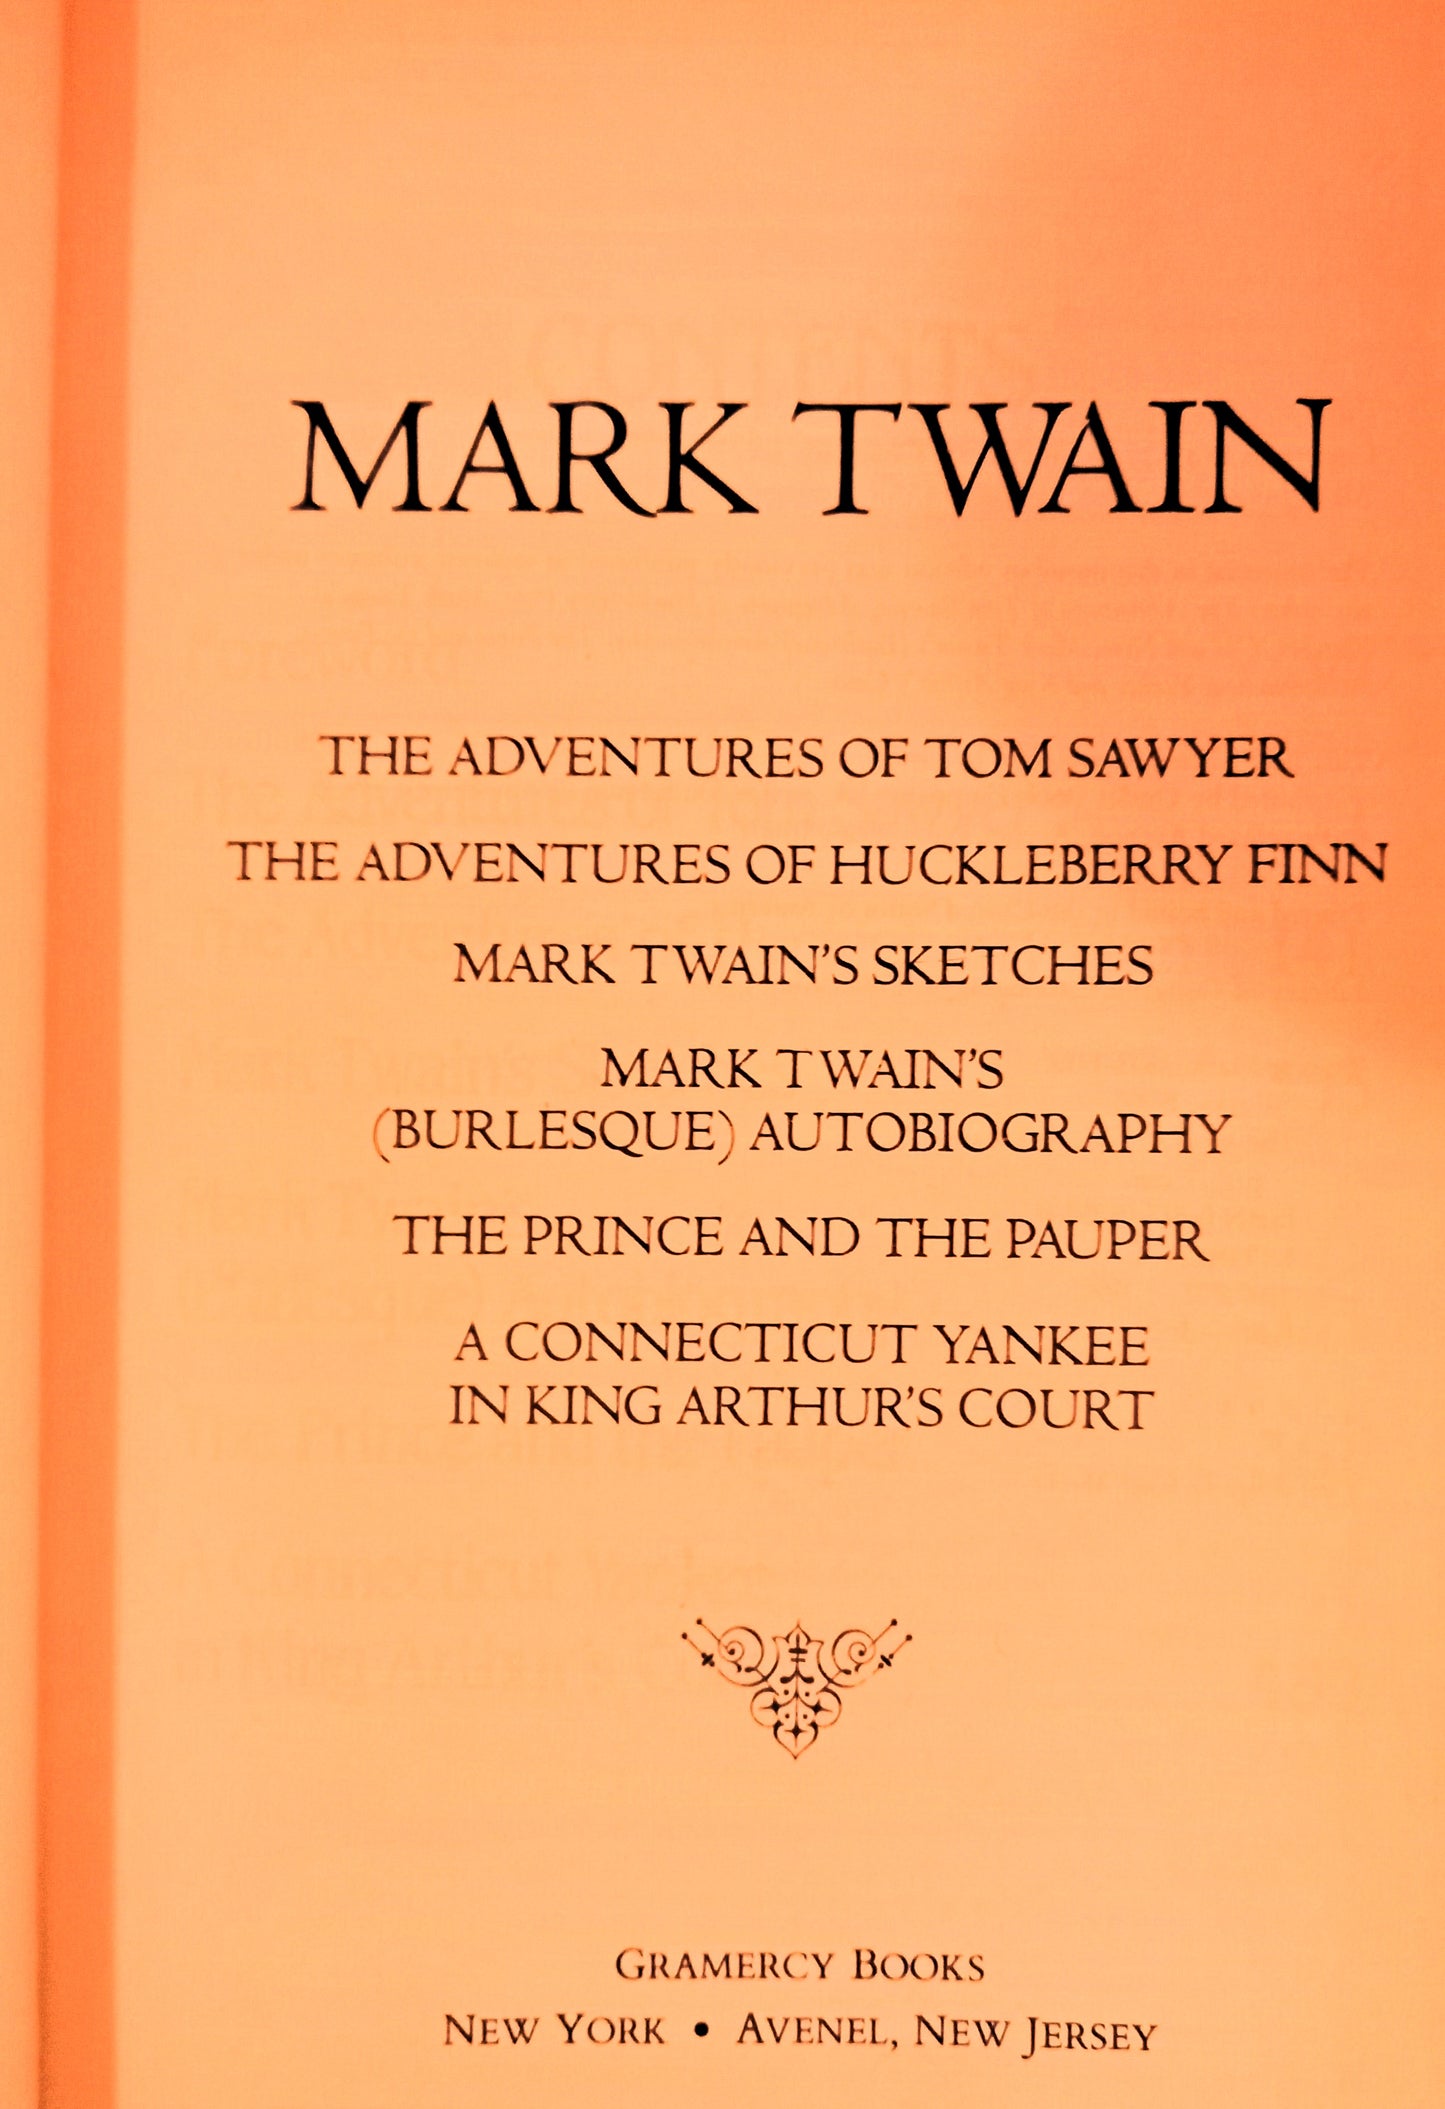 Mark Twain: Selected Works (Deluxe Edition)